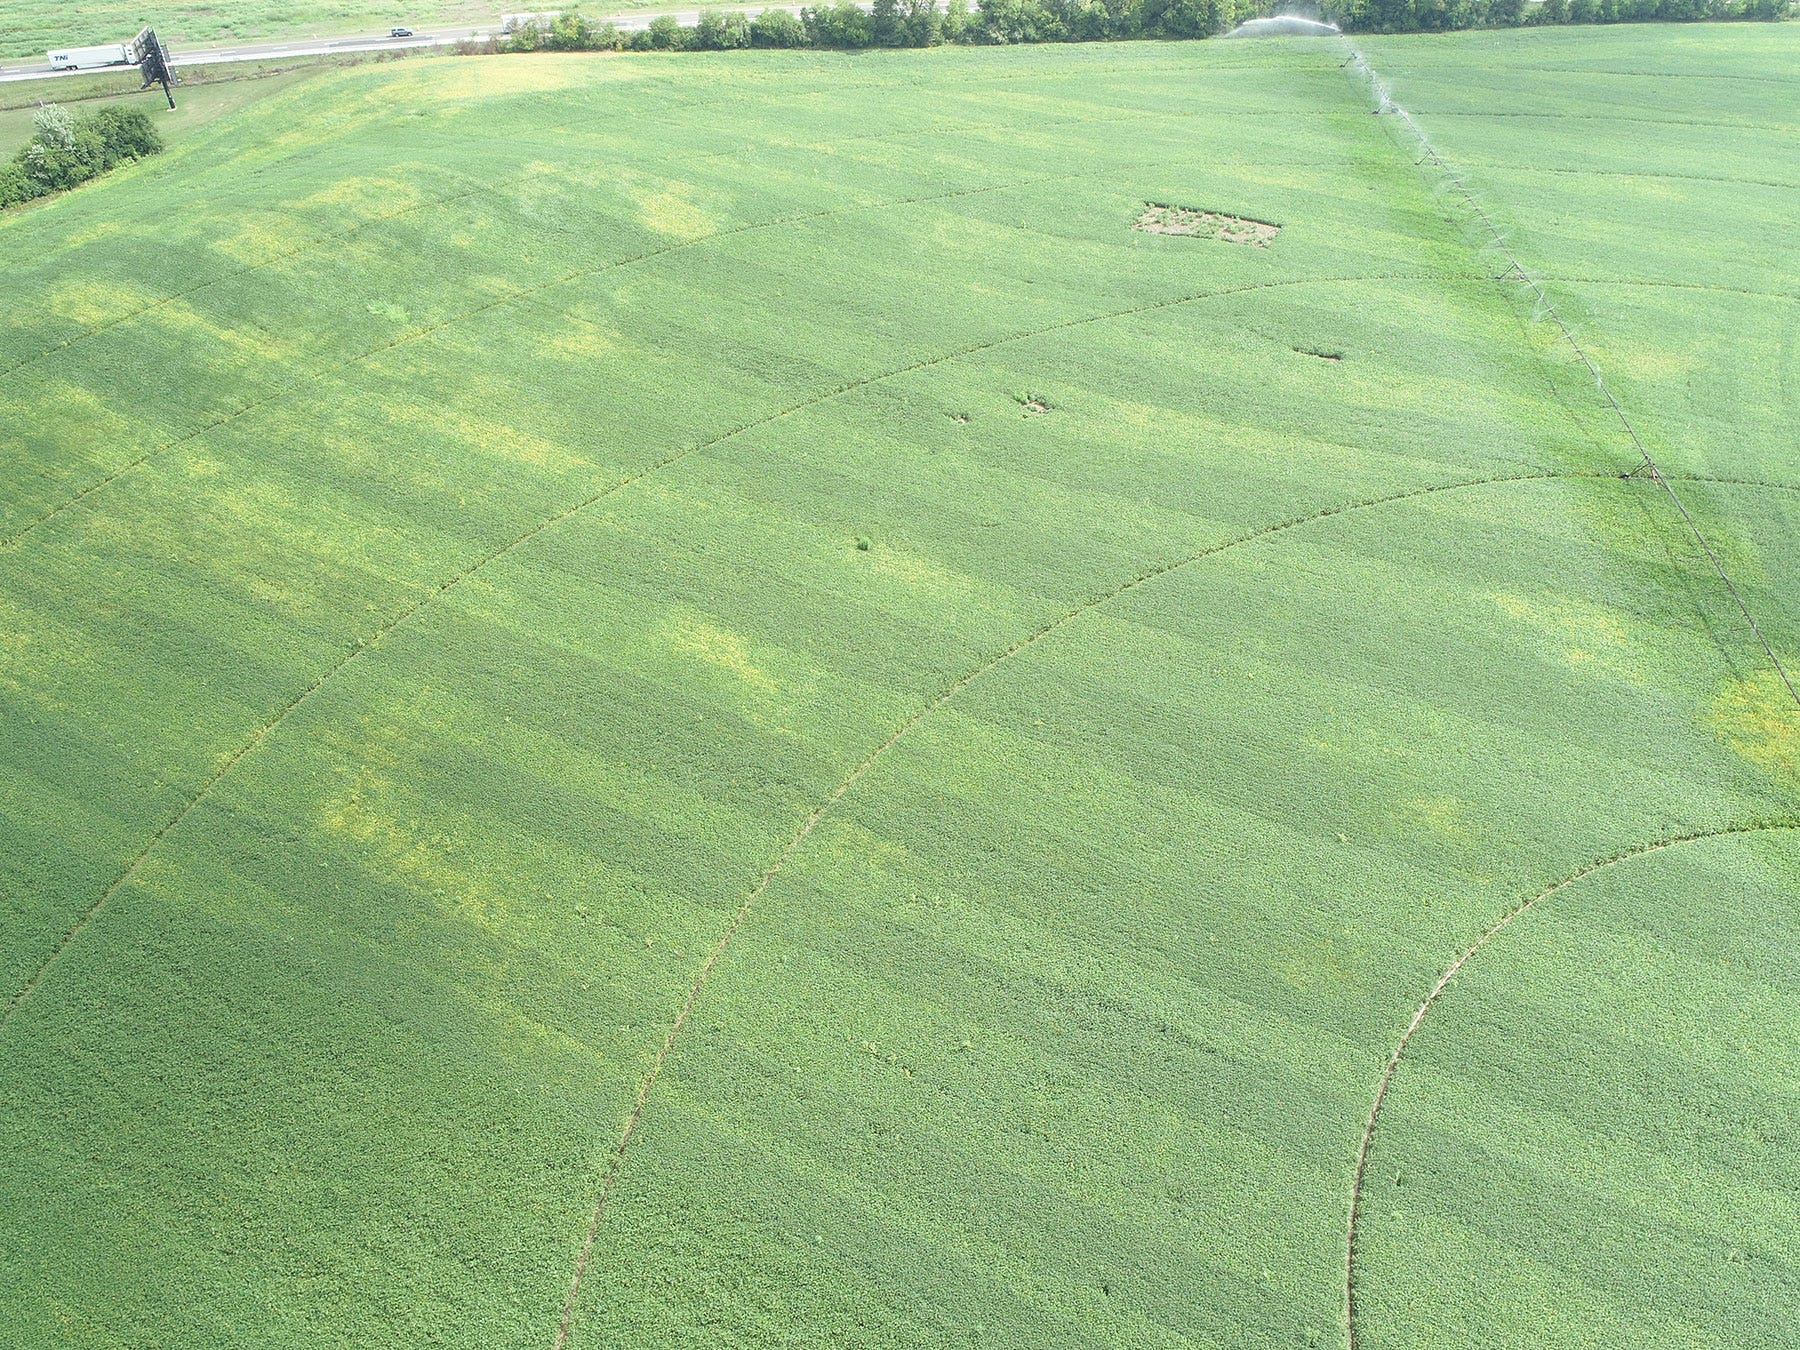 drone image of soybean field with alternating strips of lighter and darker colored plants